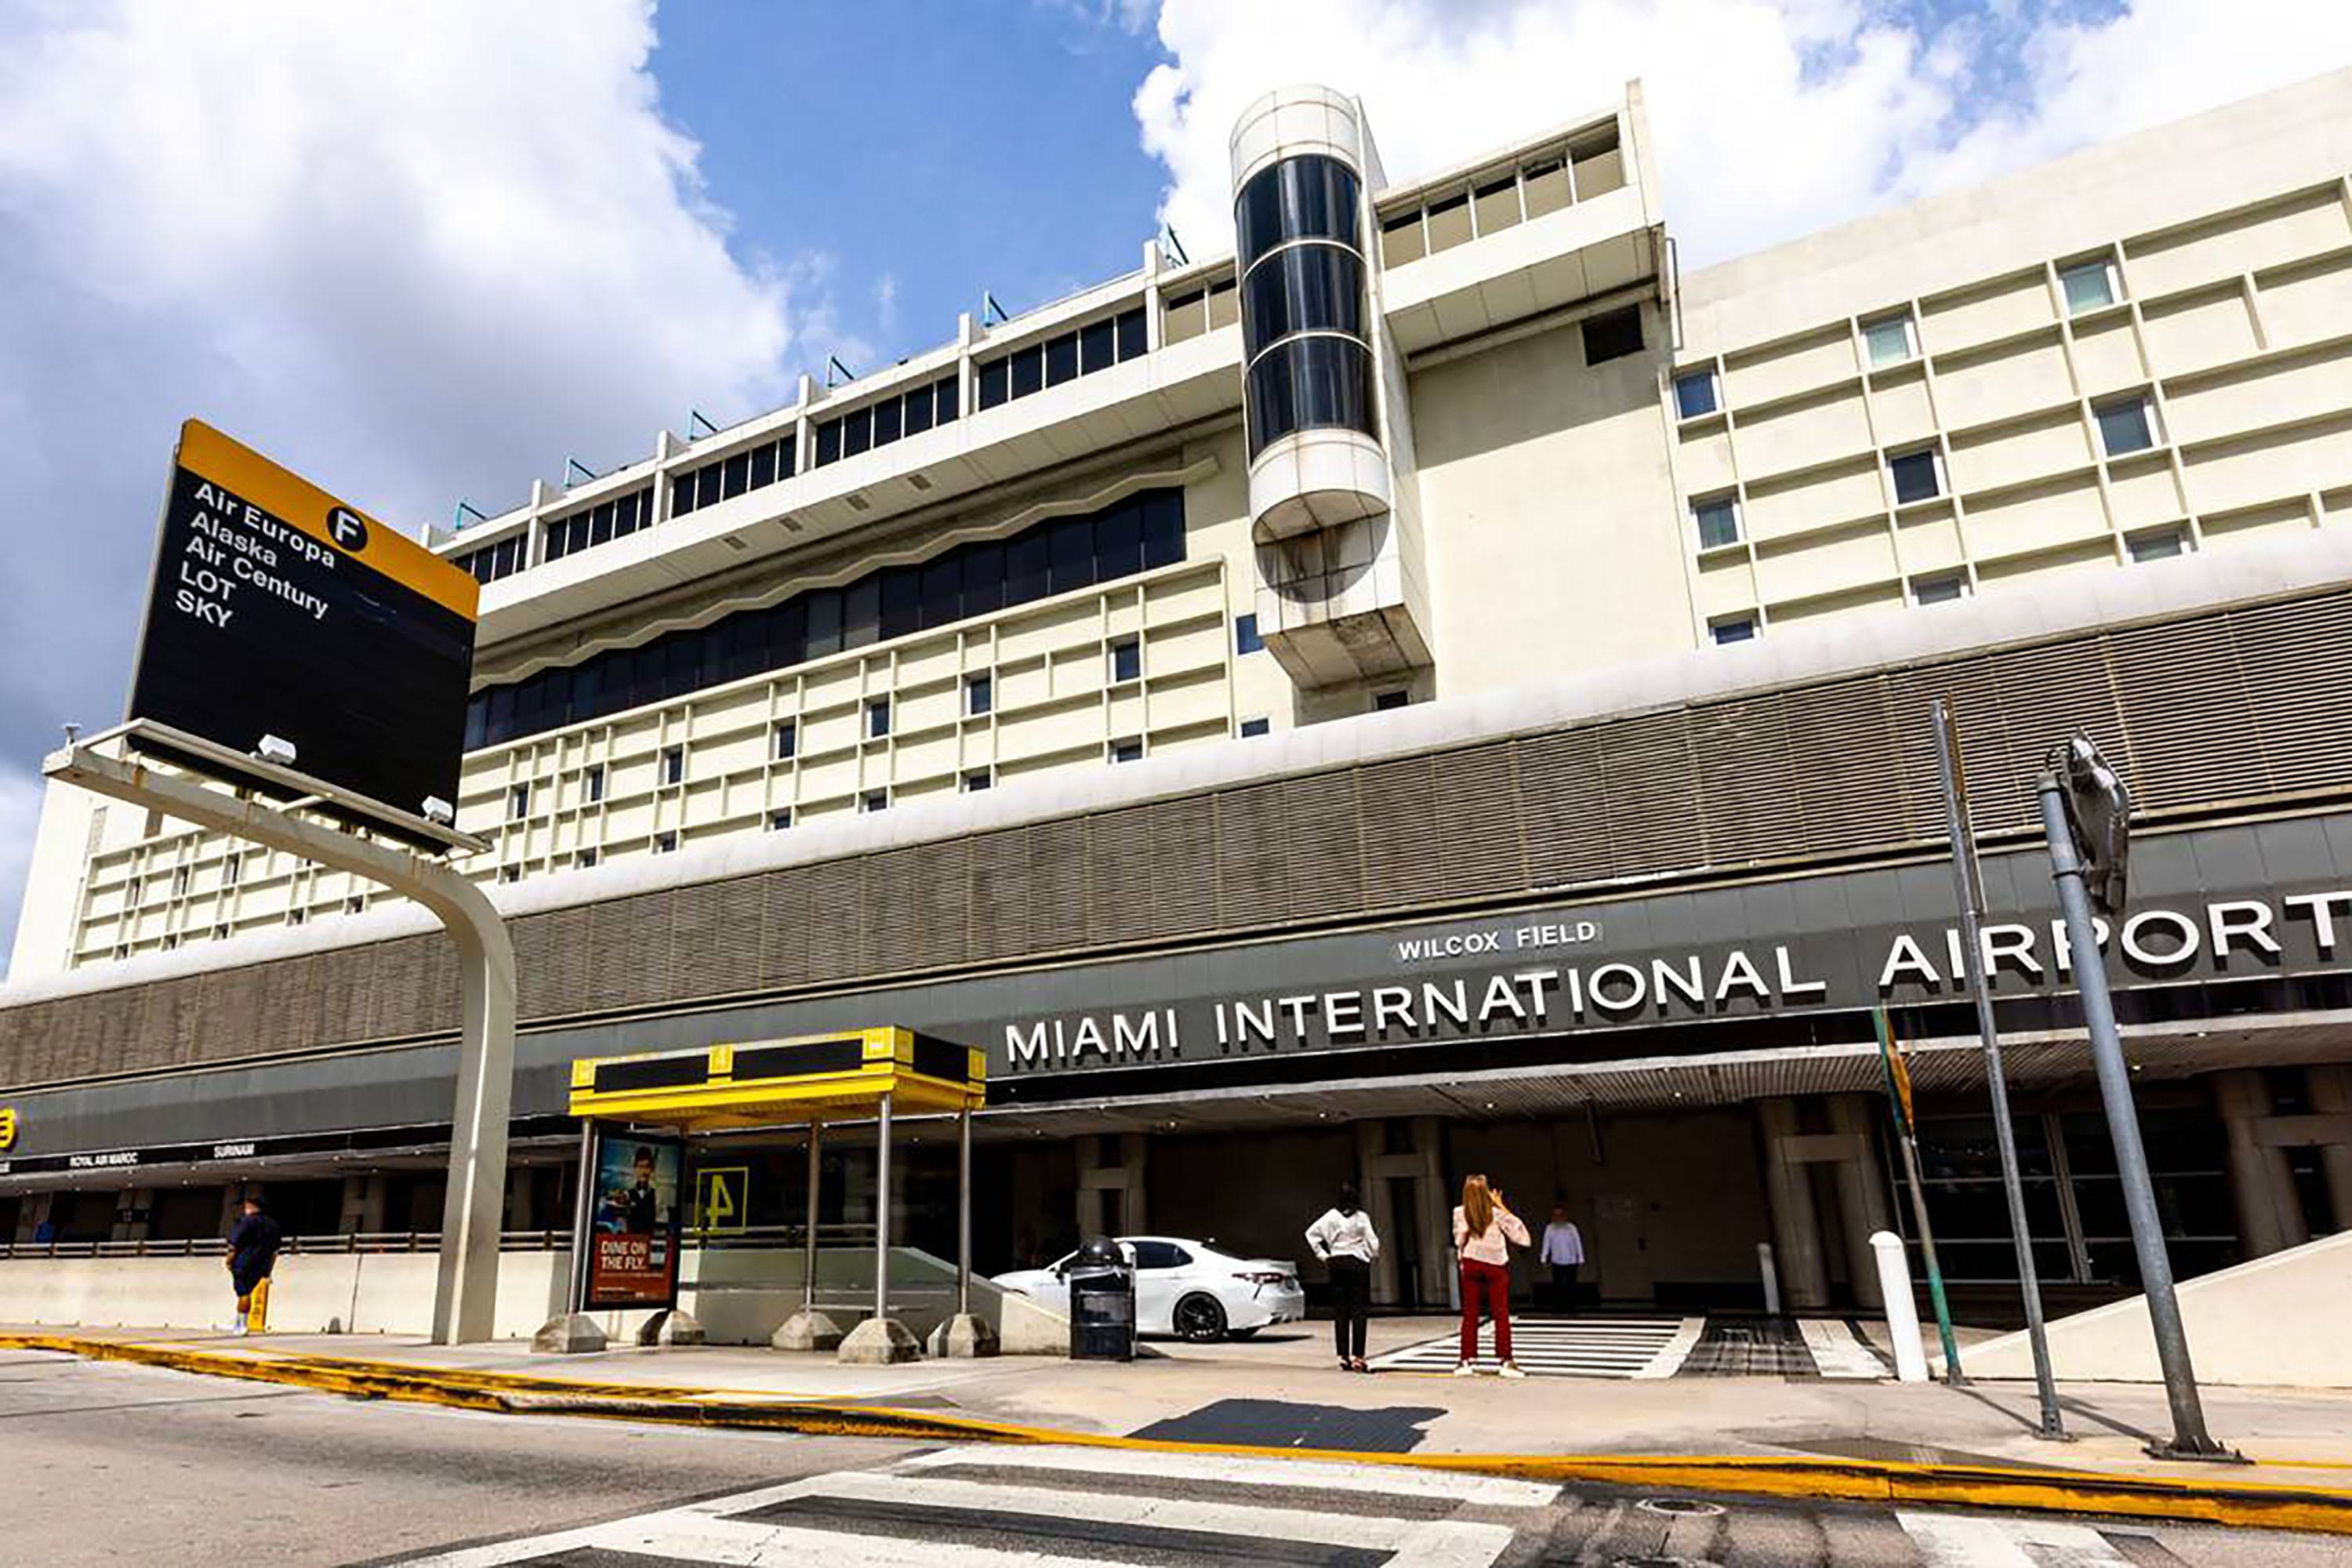 Teen girl stabbed at Miami International Airport was living there